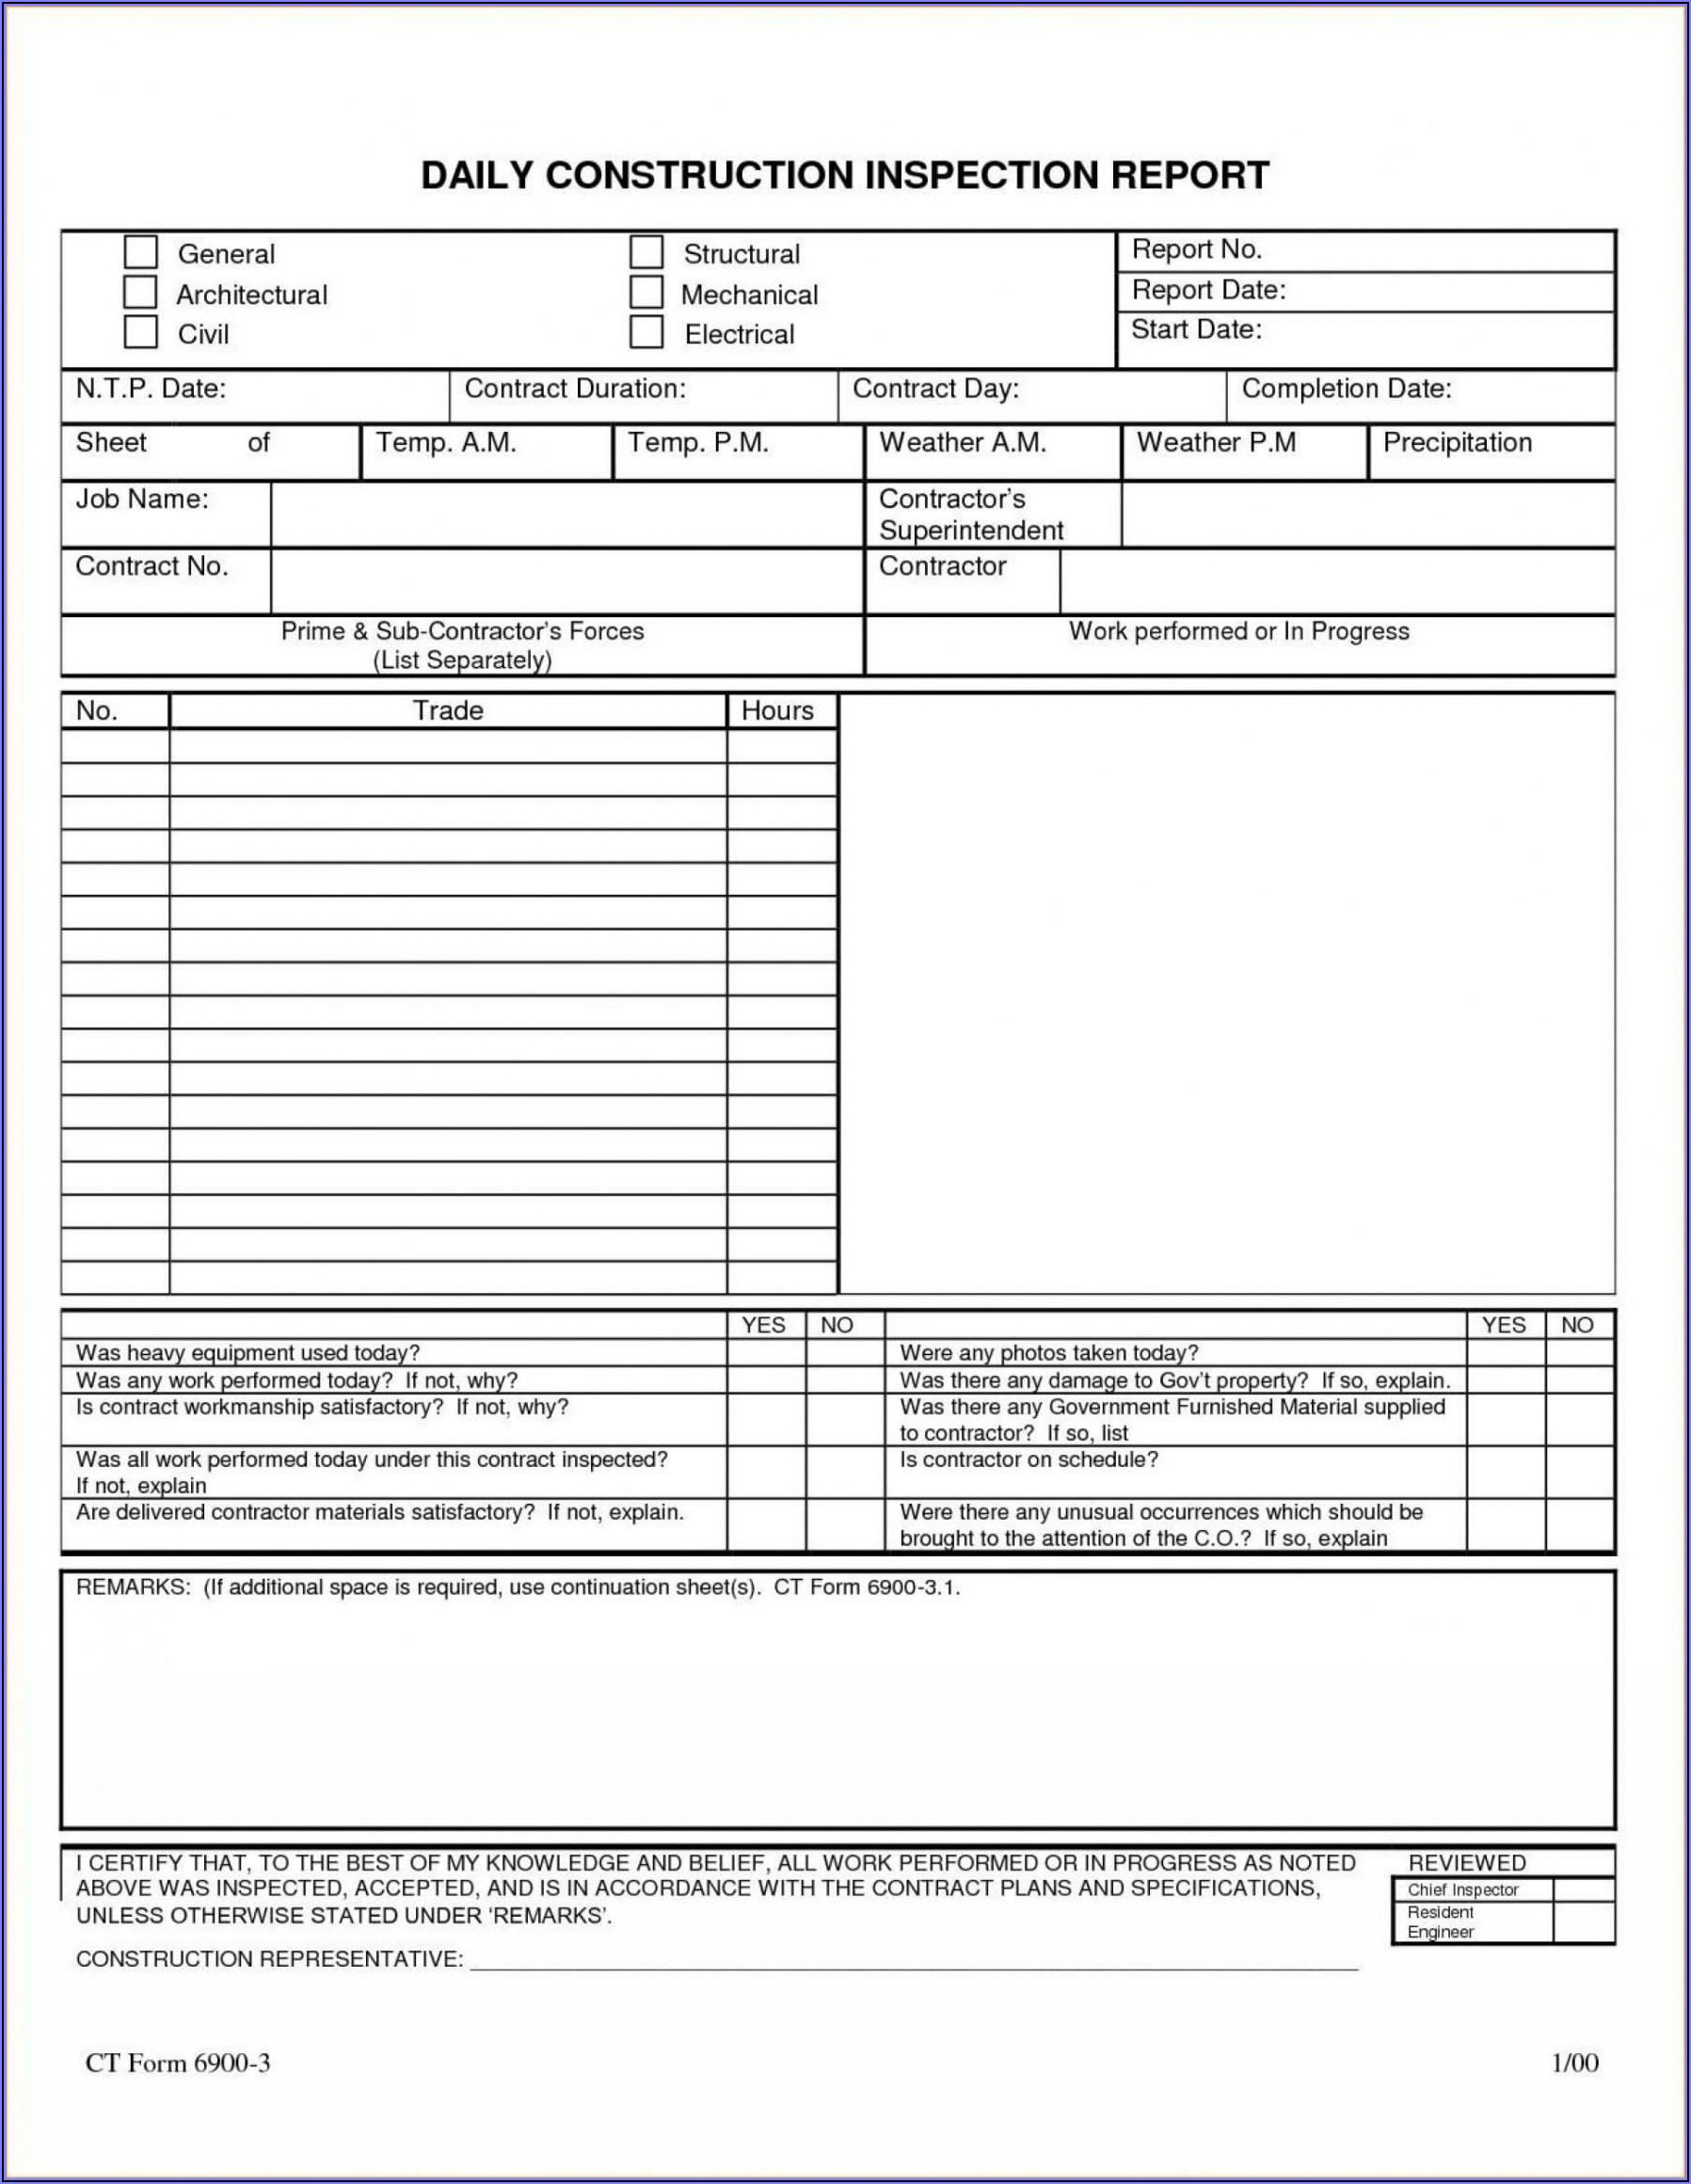 Construction Daily Progress Report Template Free